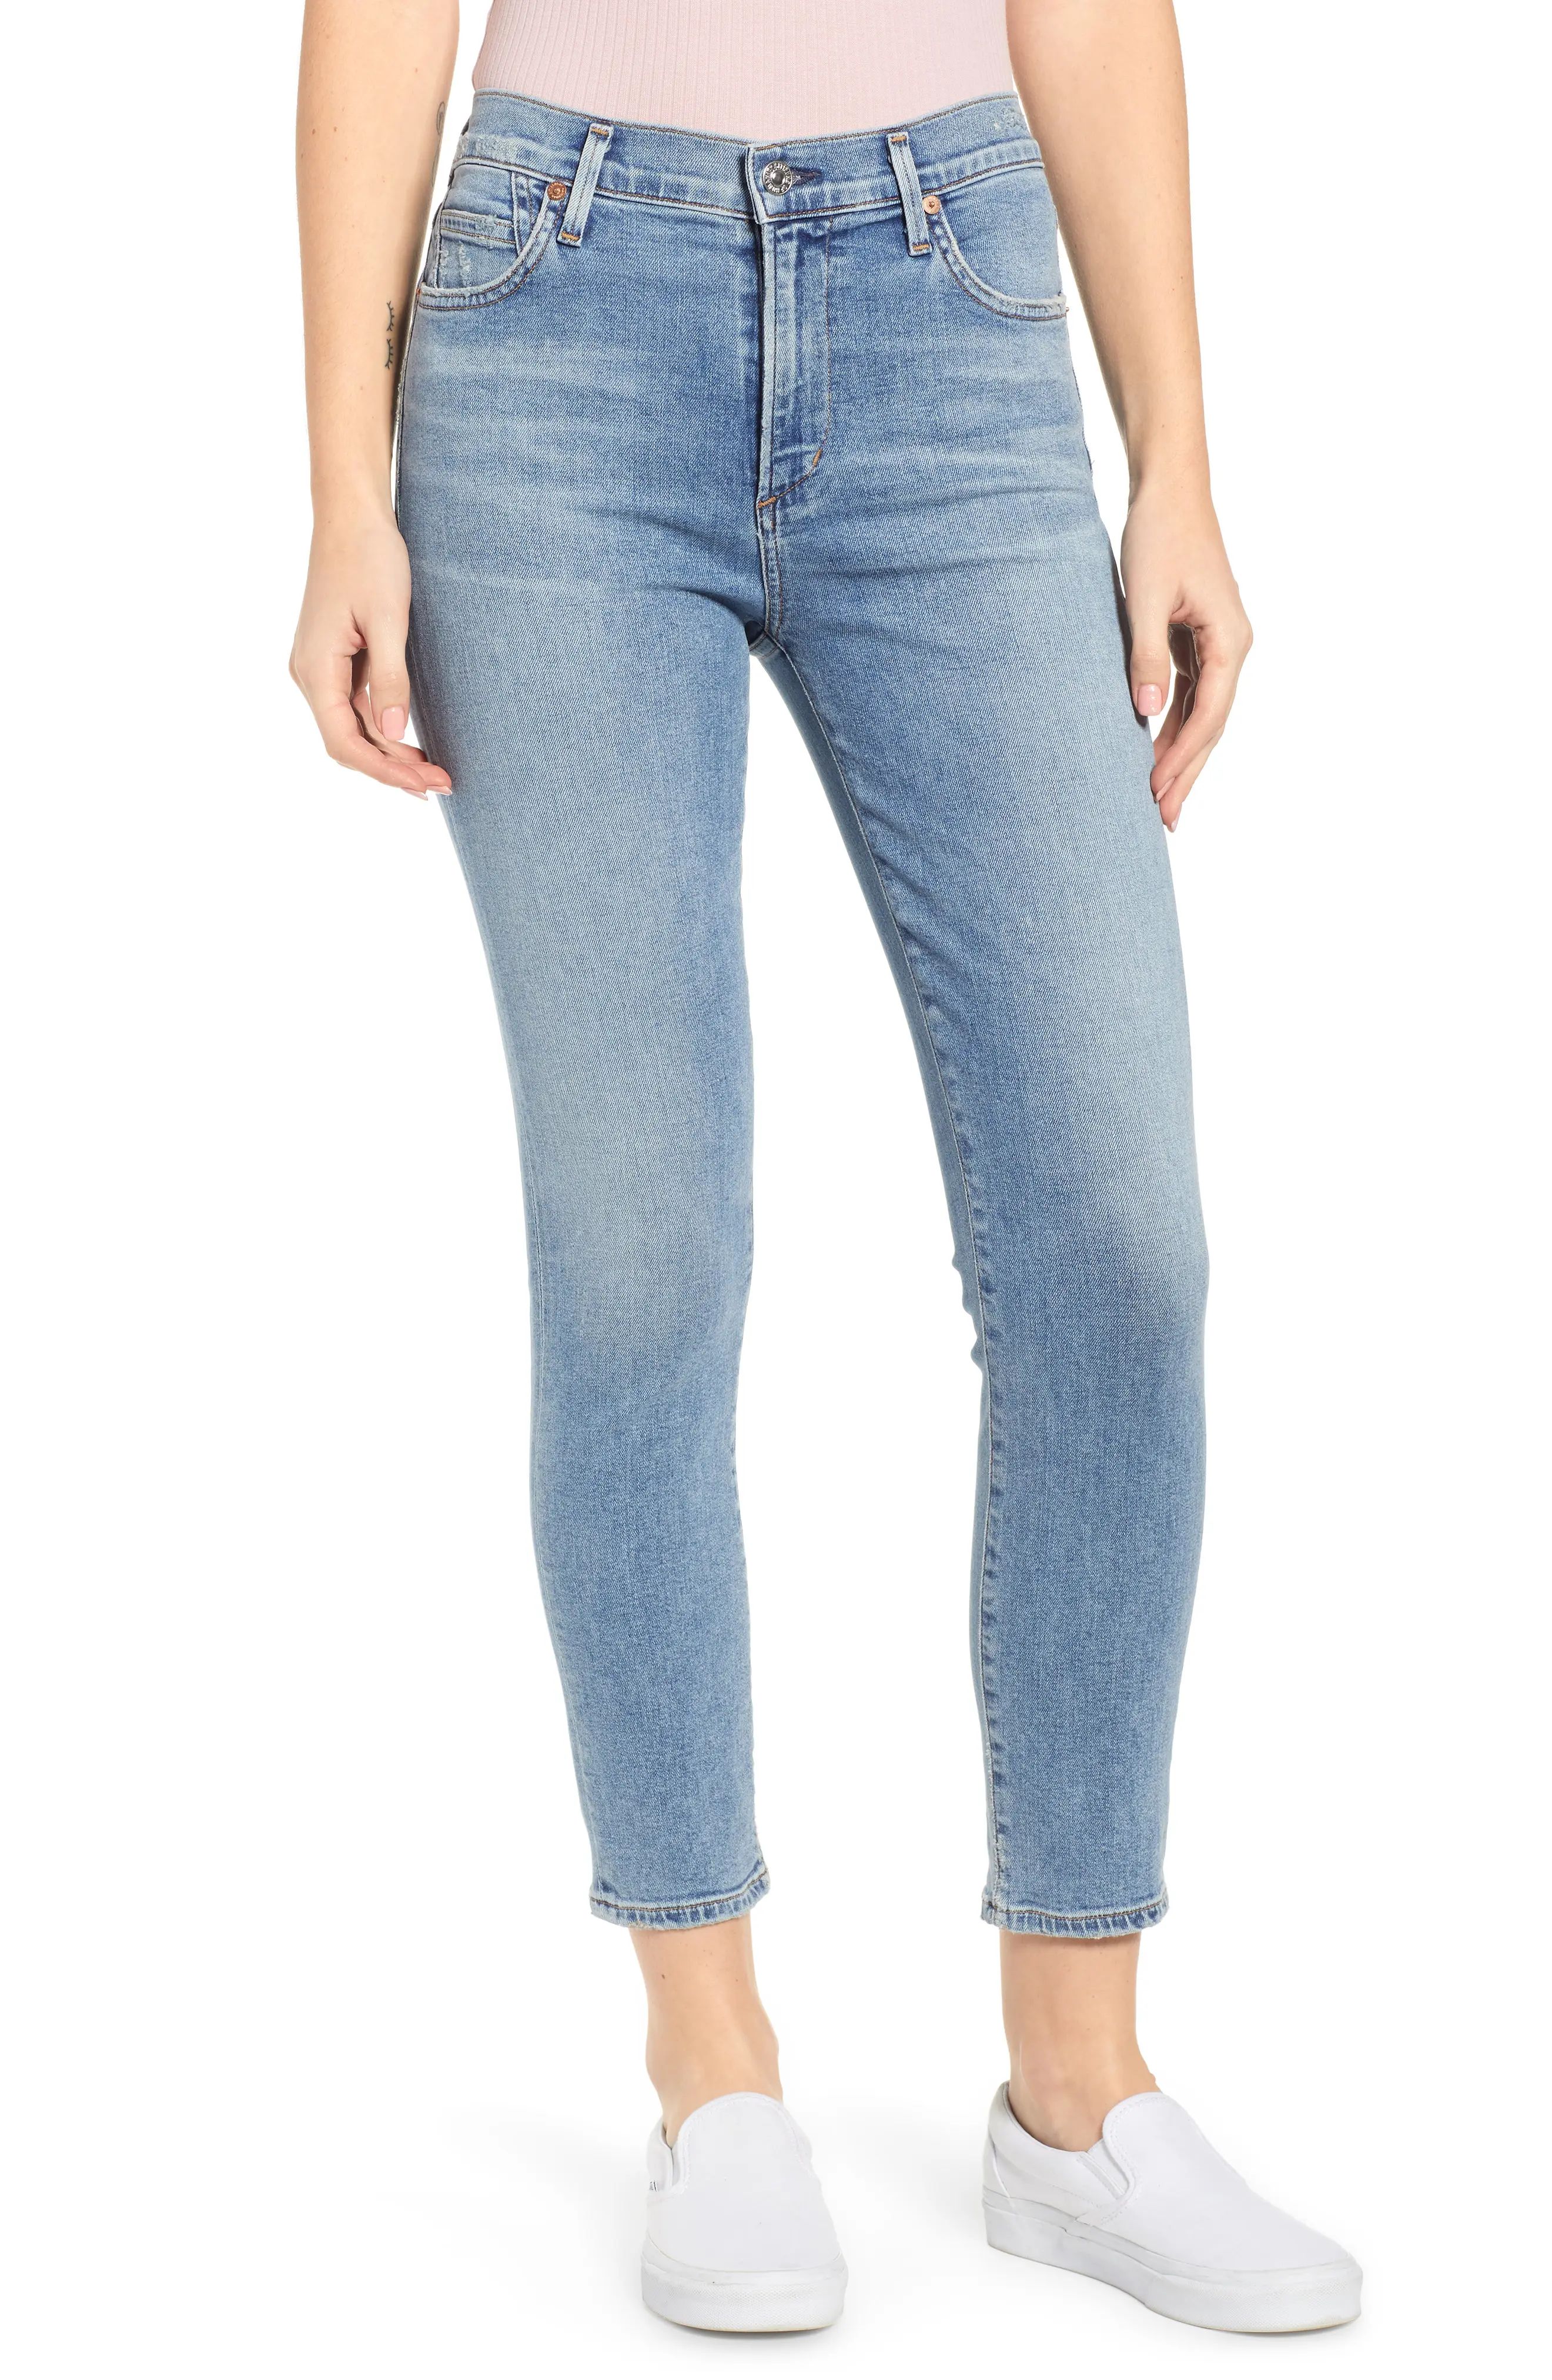 Women's Citizens Of Humanity Rocket High Waist Crop Skinny Jeans, Size 30 - Blue | Nordstrom